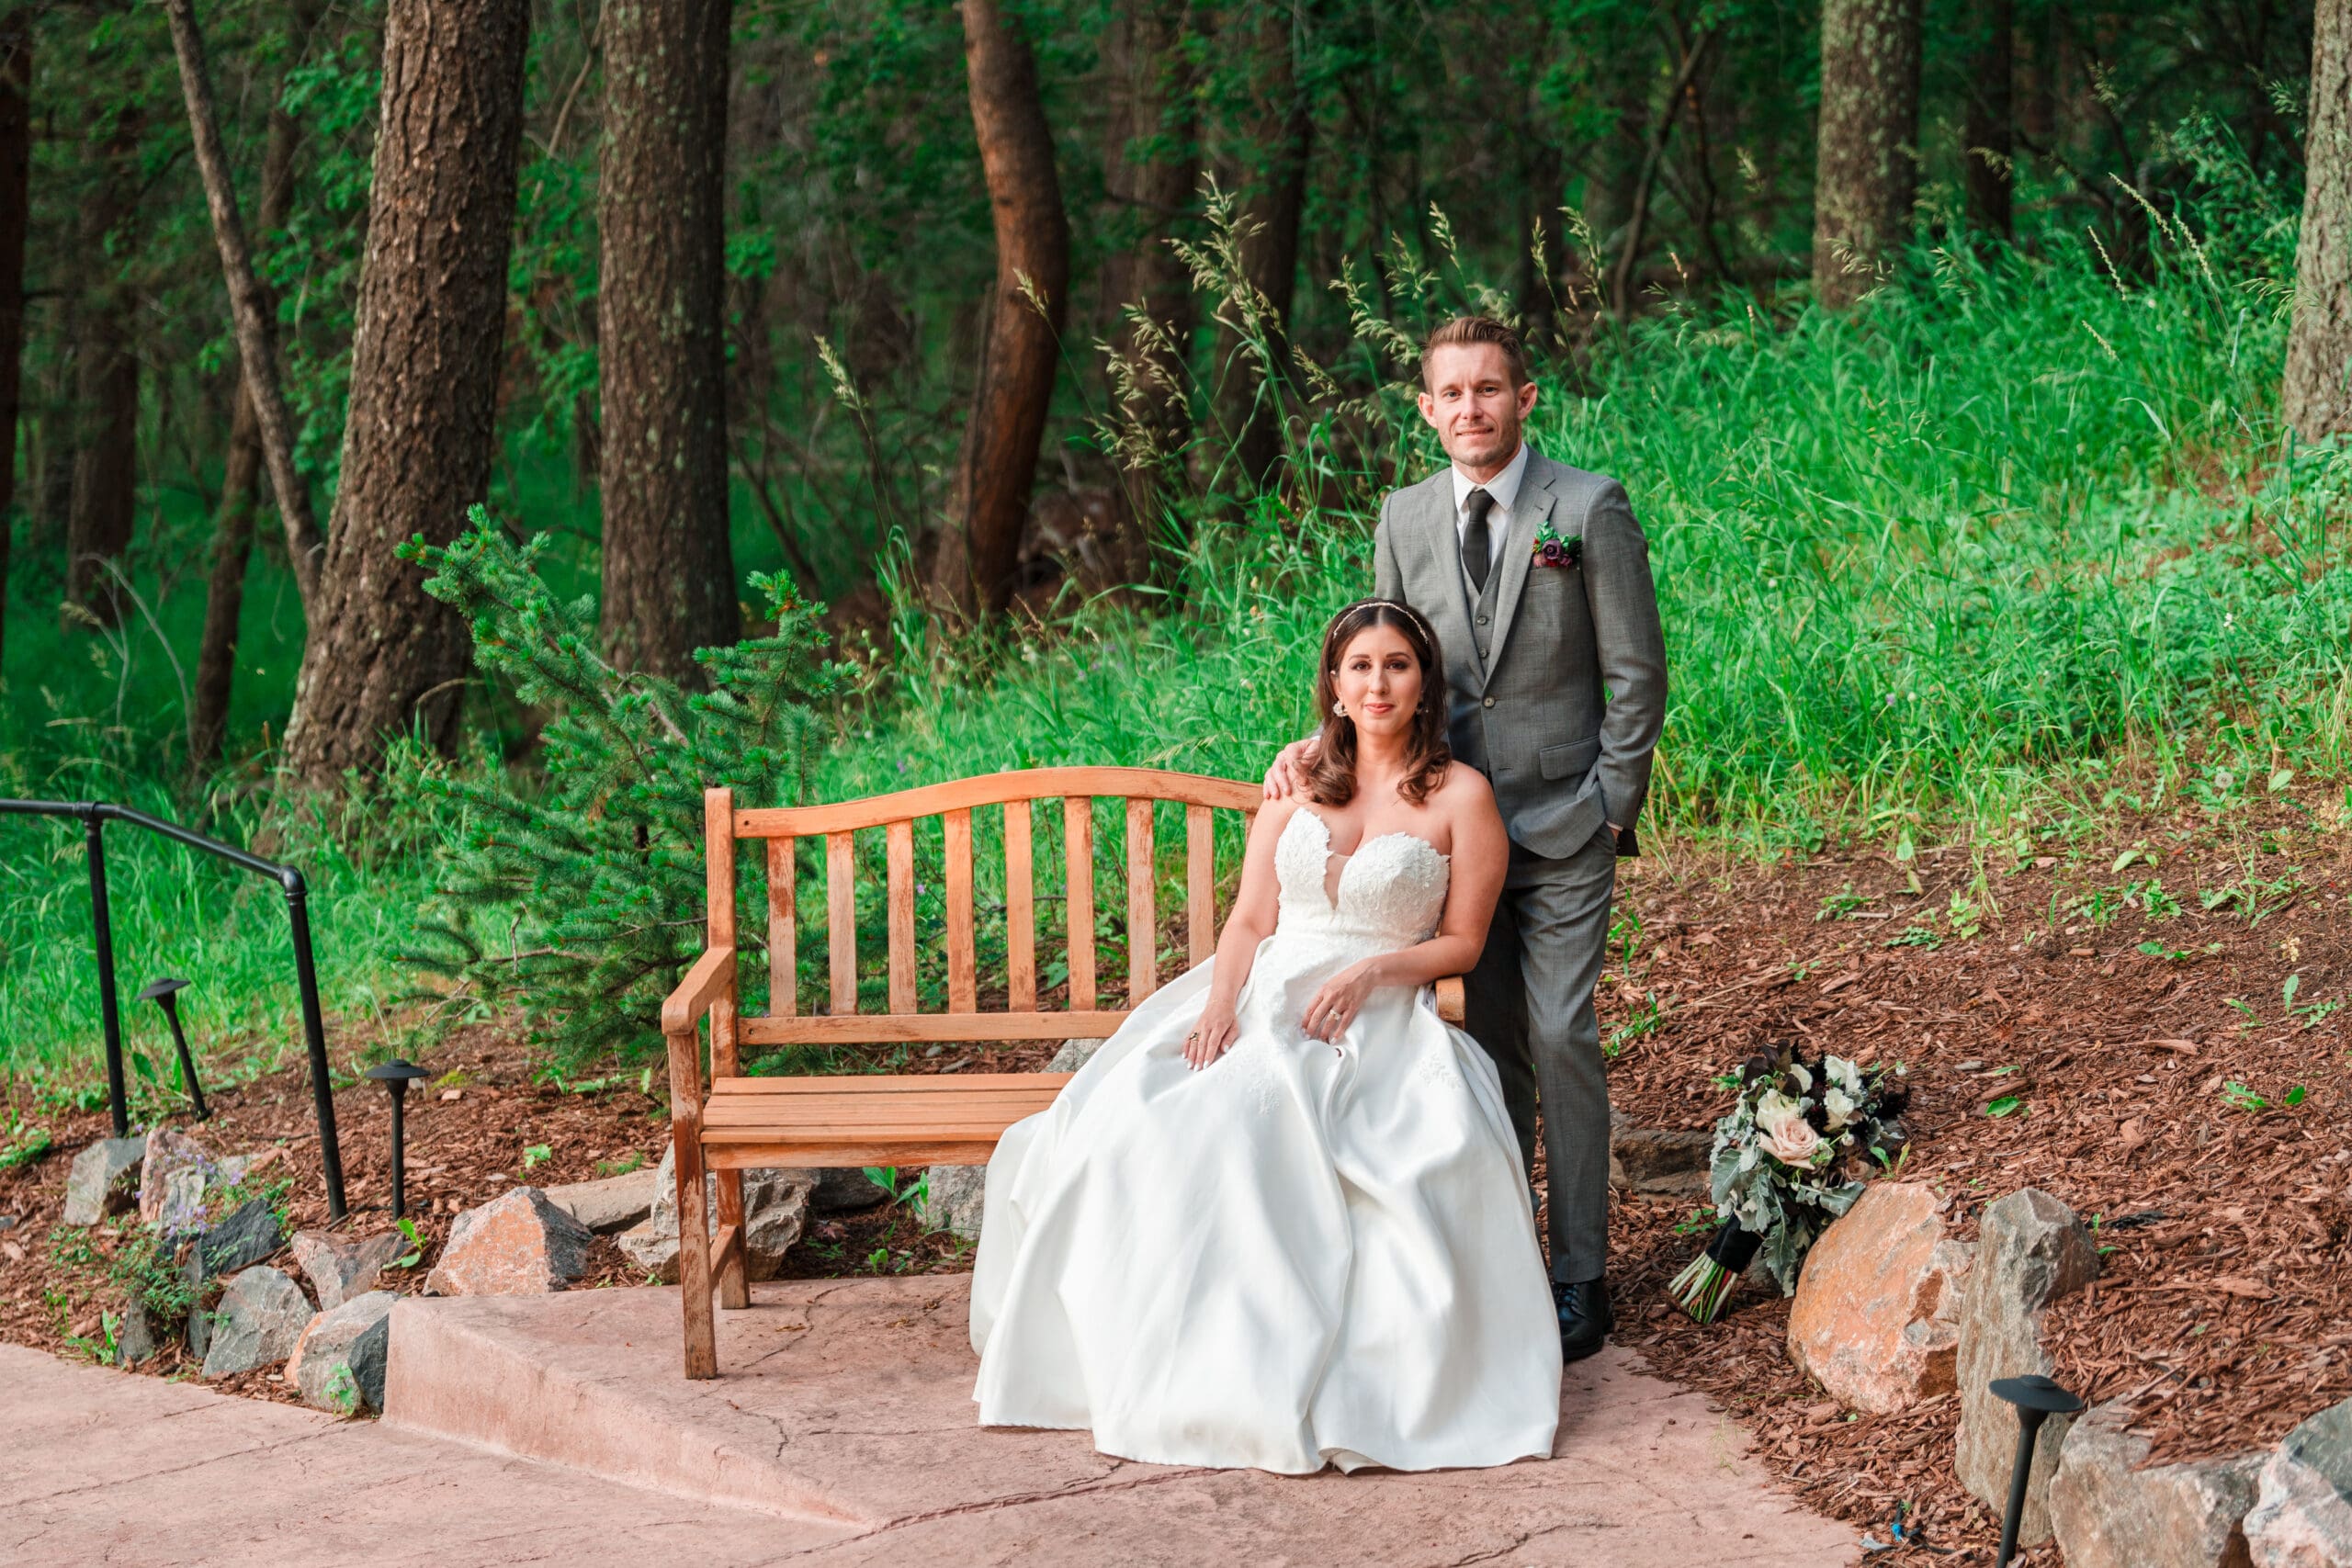 Destination wedding bliss: Bride sits on a bench with her husband standing beside her, symbolizing their love and unity on their special day.